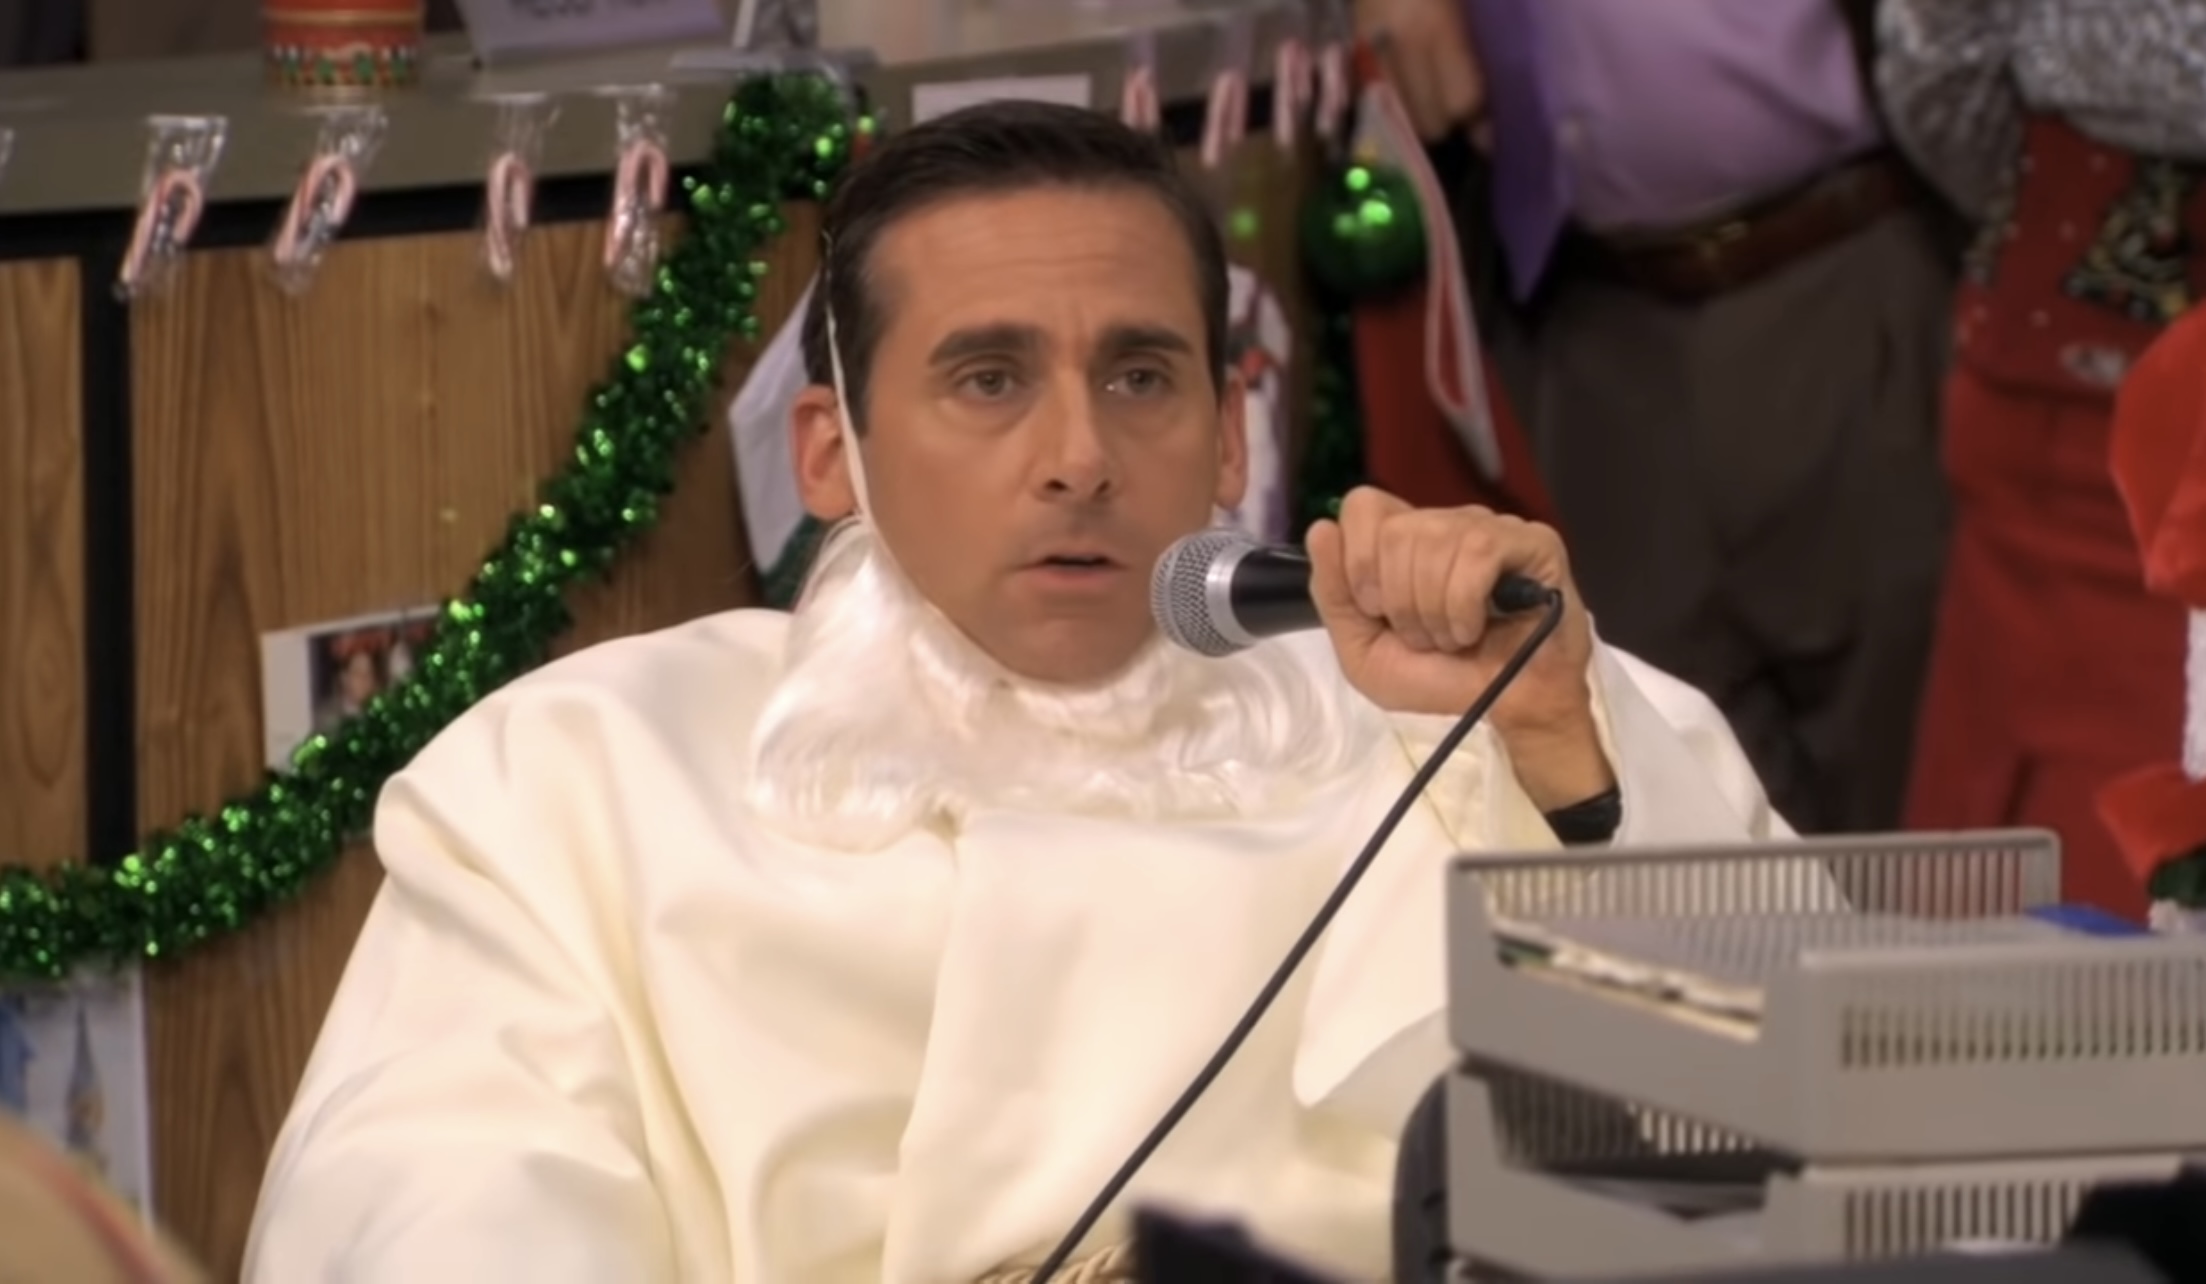 Michael (played by Steve Carell) dresses up like Jesus to heckle the rest of the office&squot;s presents in "Secret Santa".